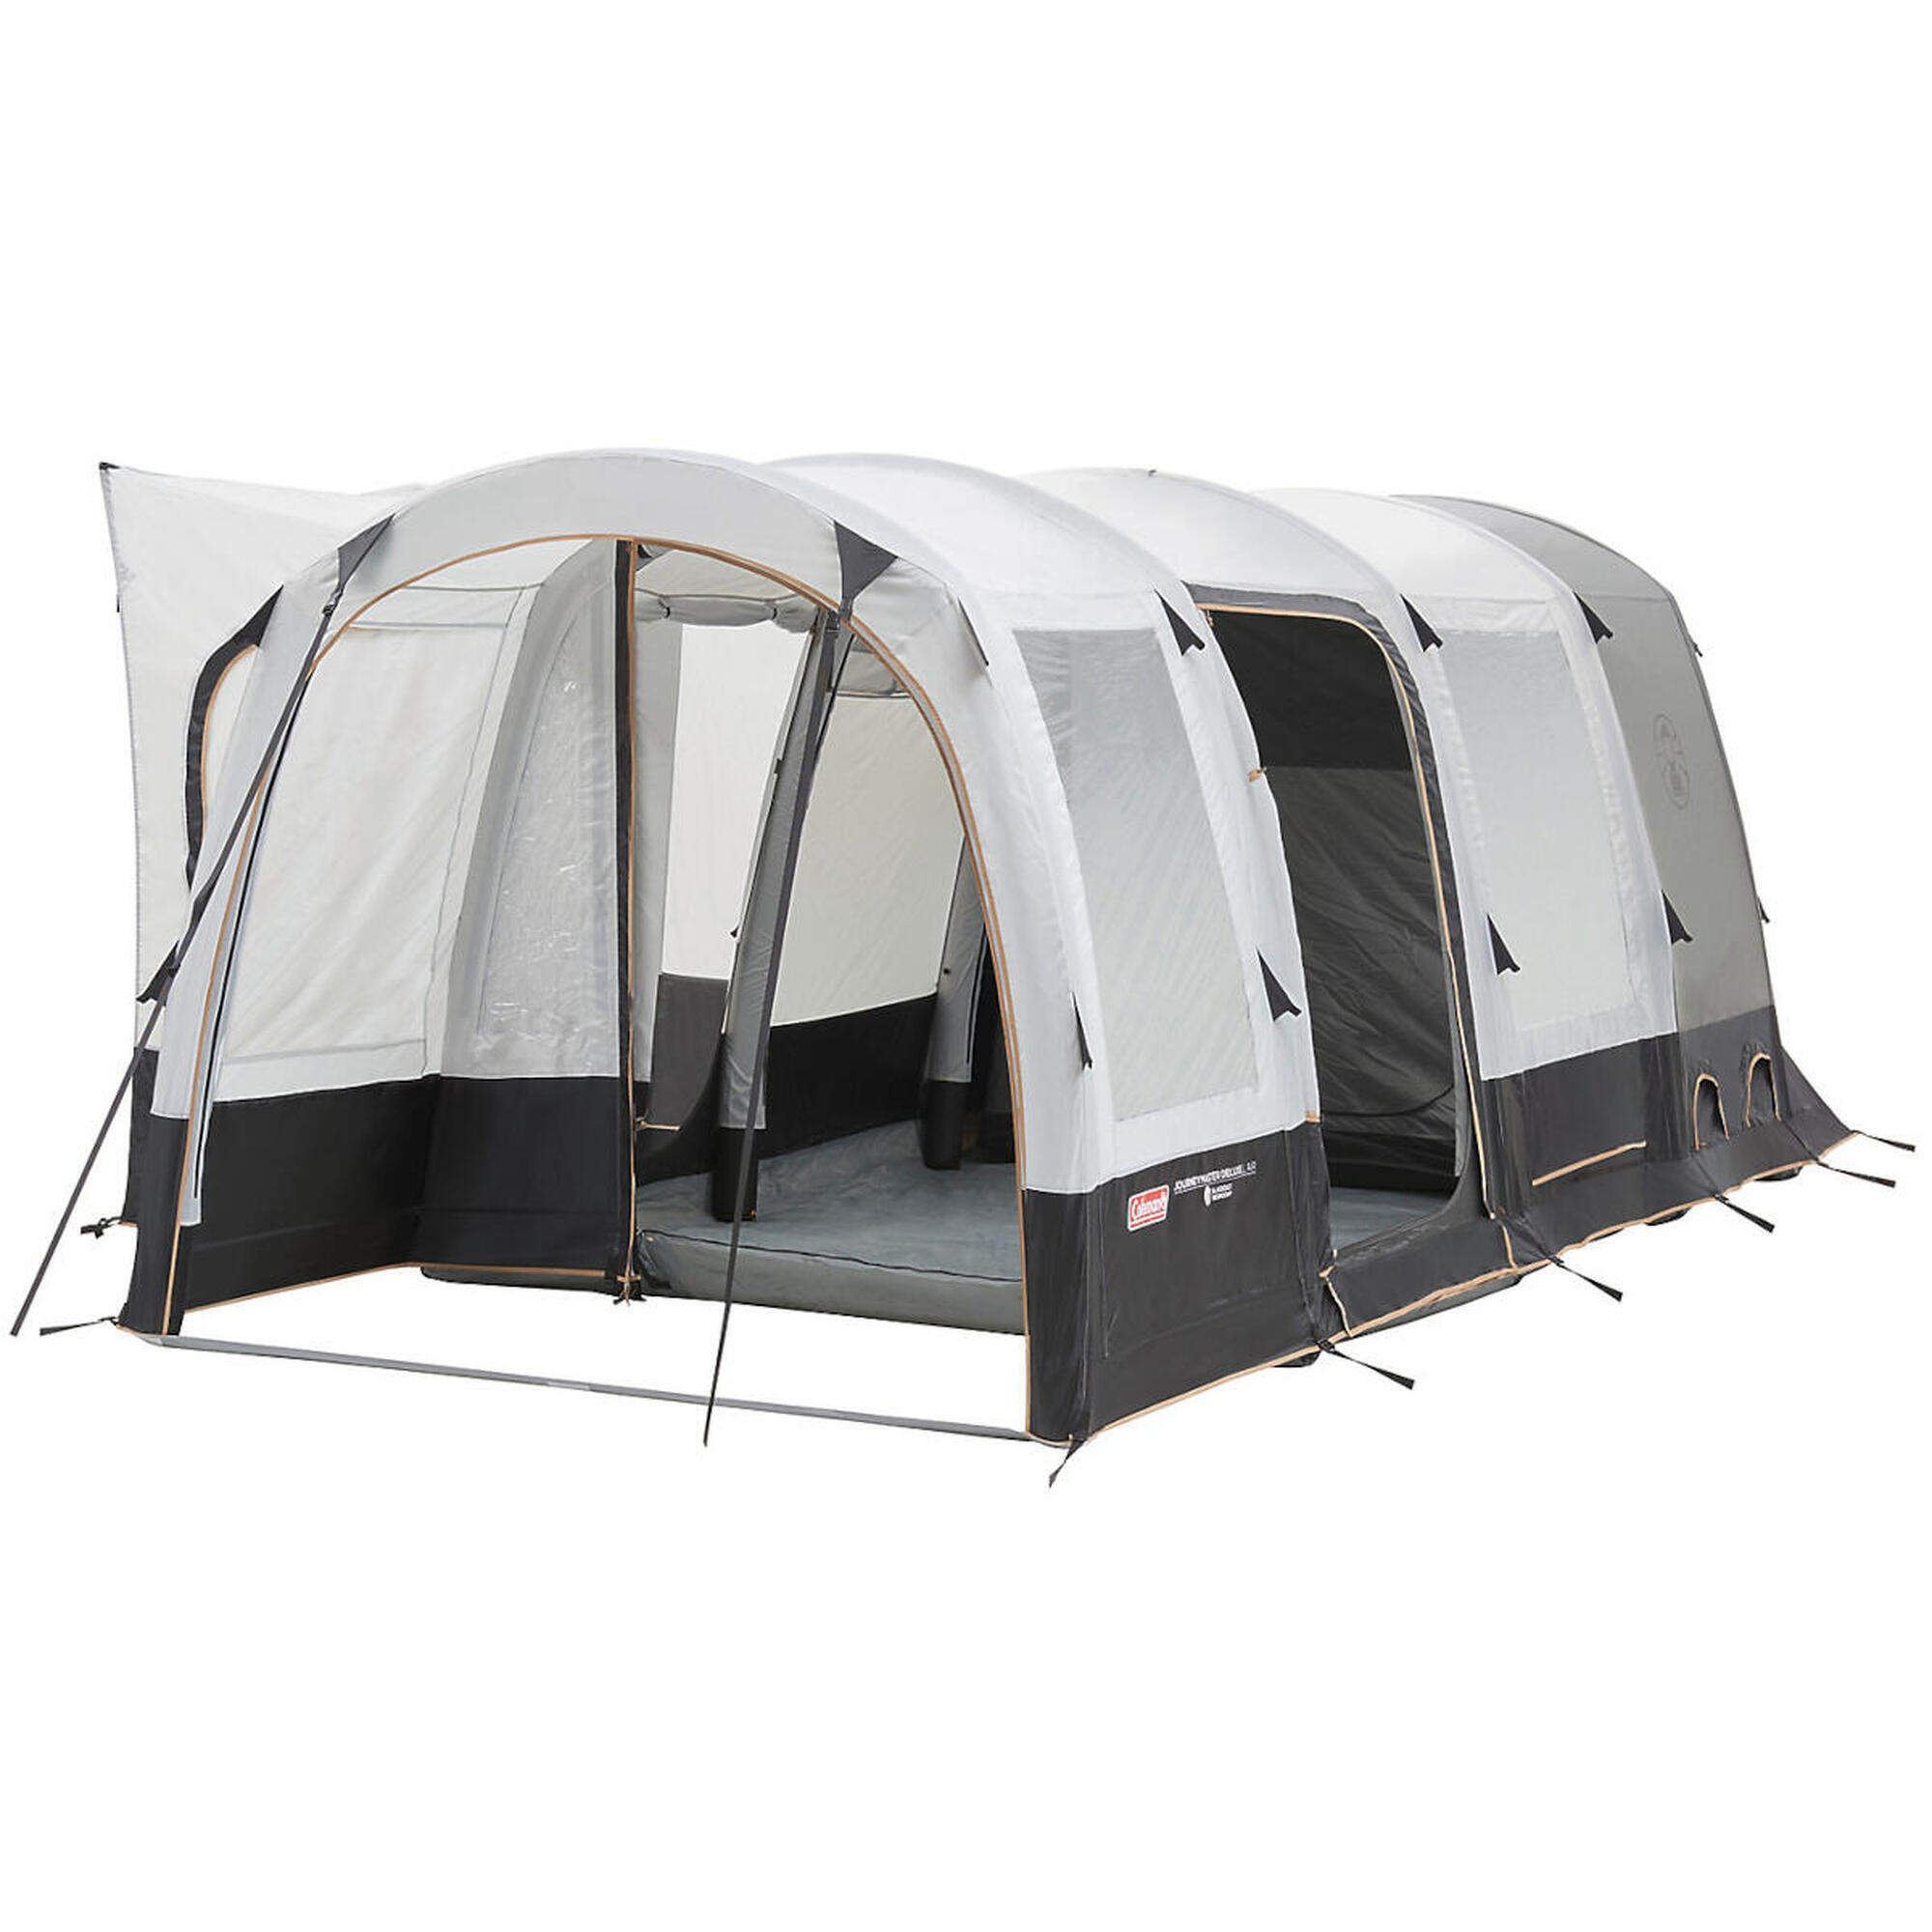 COLEMAN Factory Second Coleman Journeymaster Deluxe Air L BlackOut Drive Away Awning